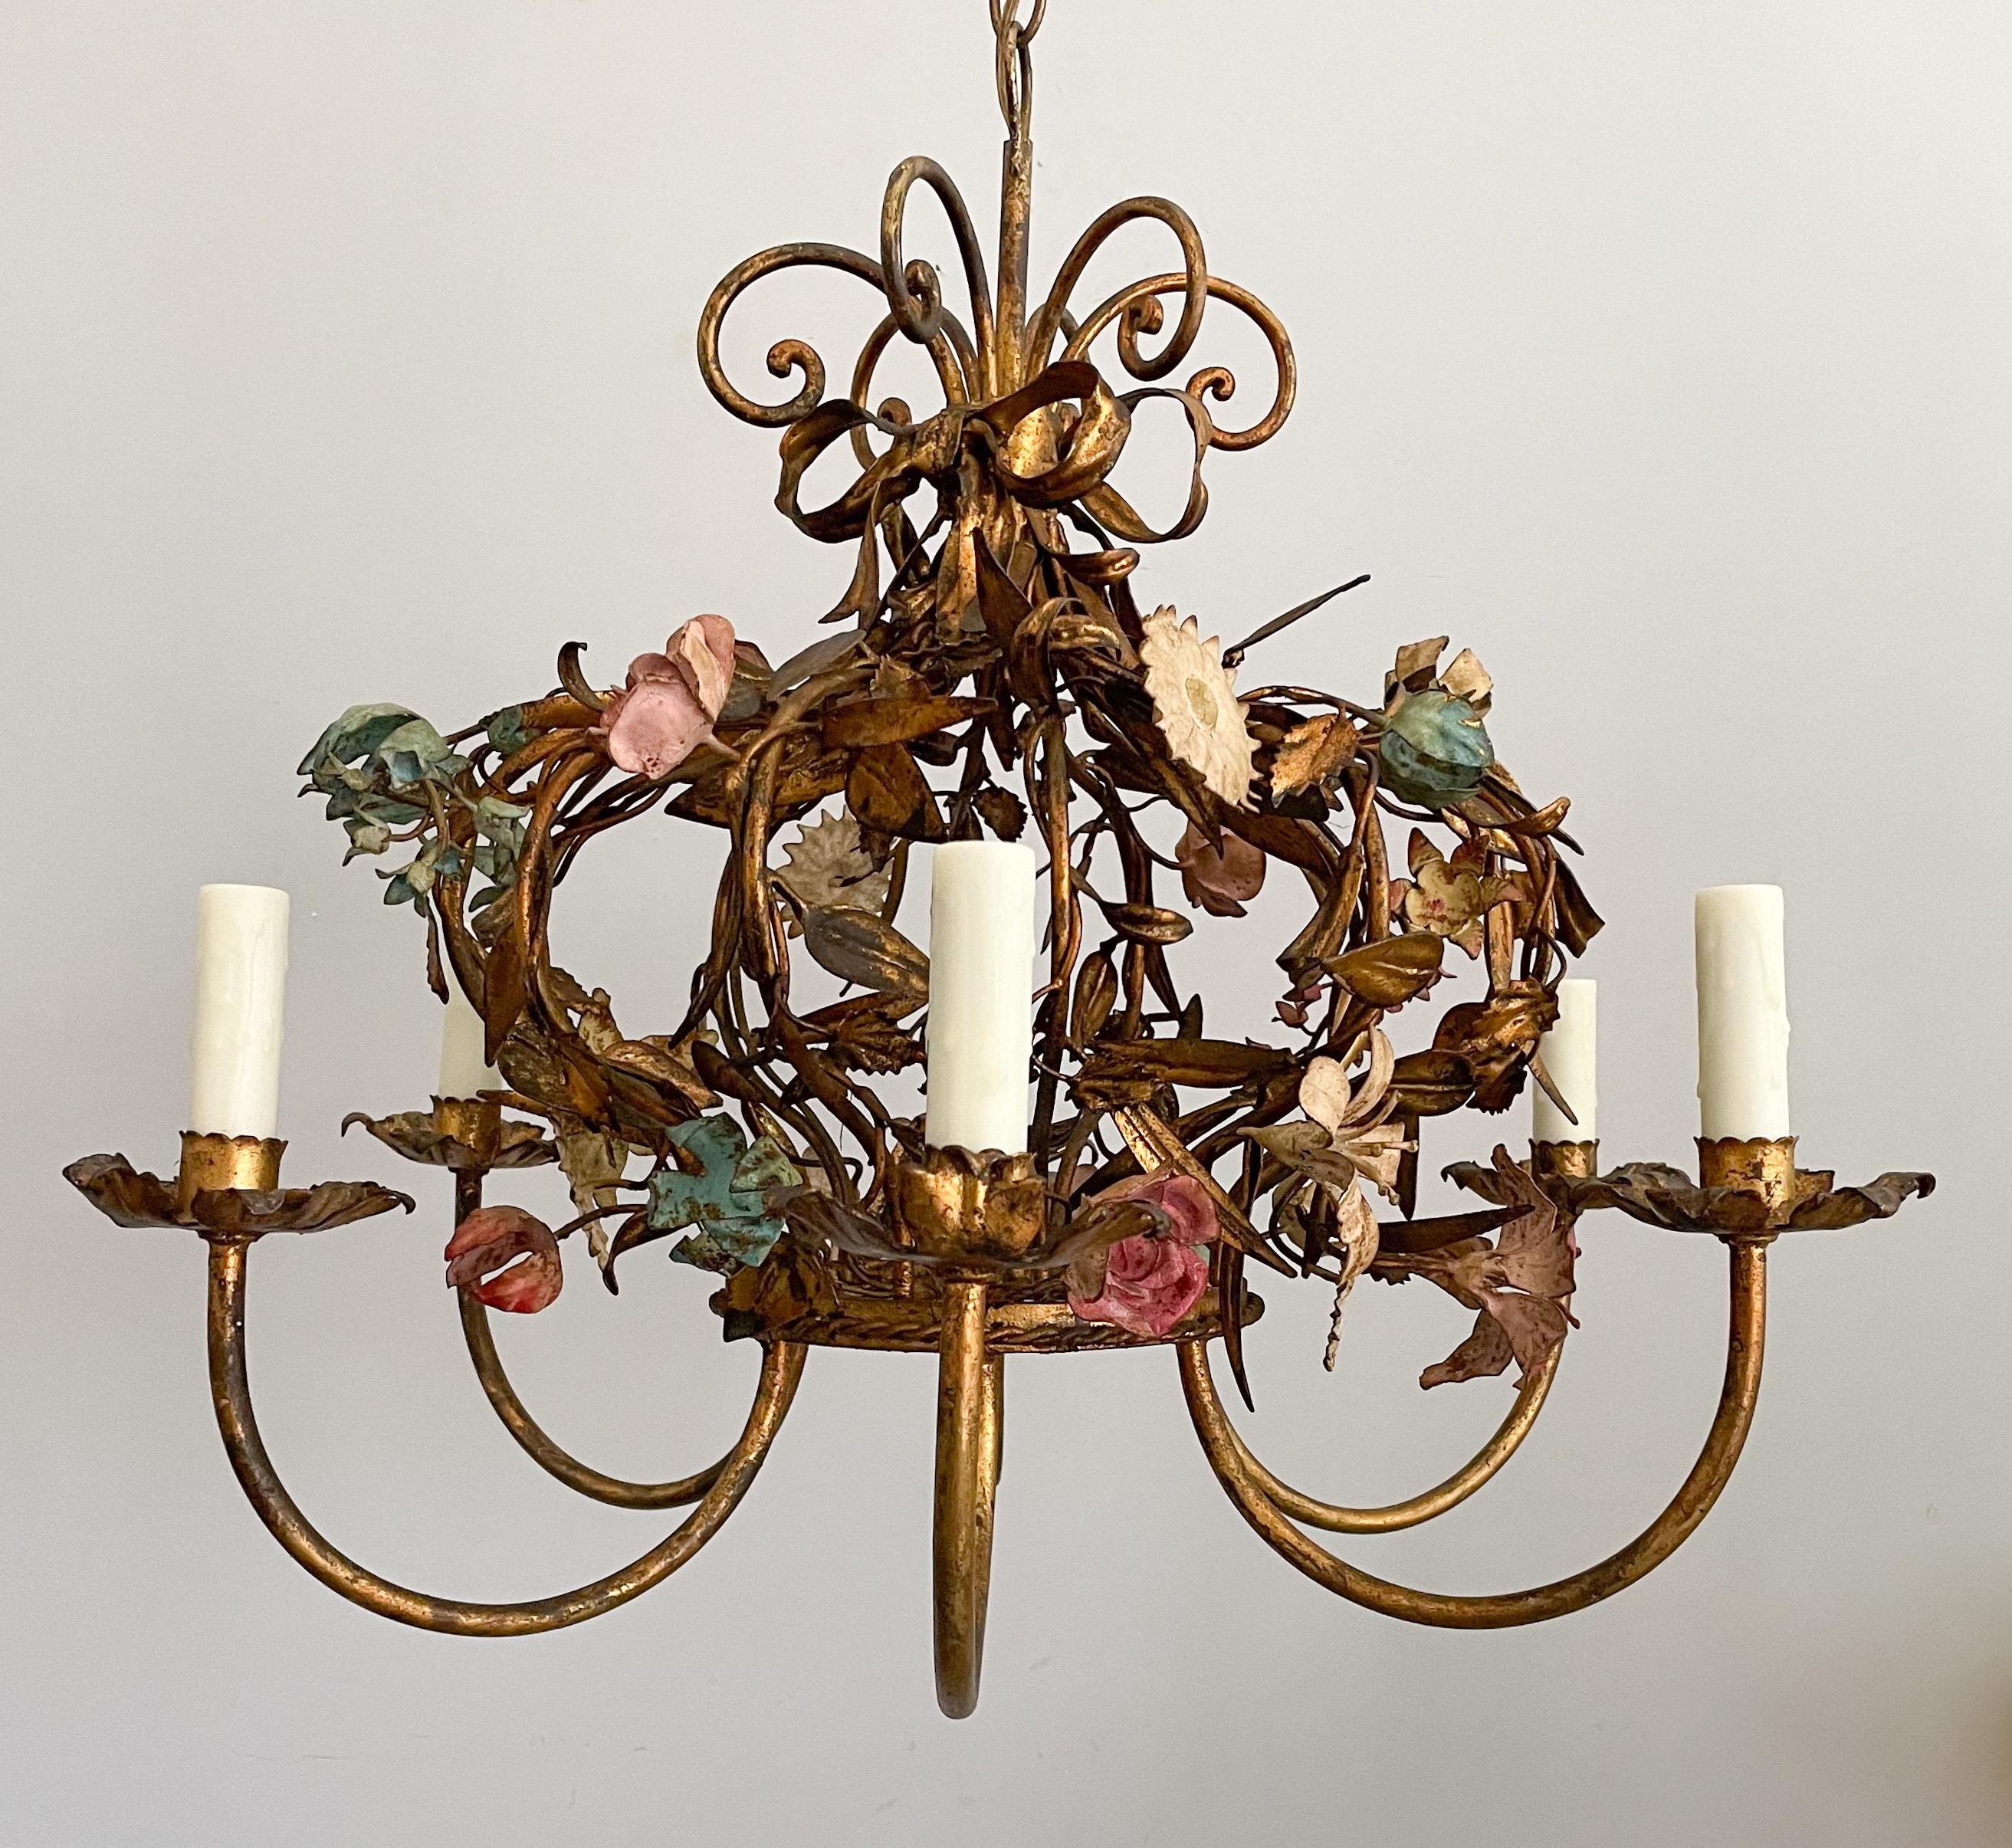 Beautiful, Italian 1940s gilt iron chandelier in the form of a crown made of flowers and foliage. 

The chandelier consists of a gilded iron frame shaped like a crown with an assortment of painted flowers held together by a gilded bow.

The